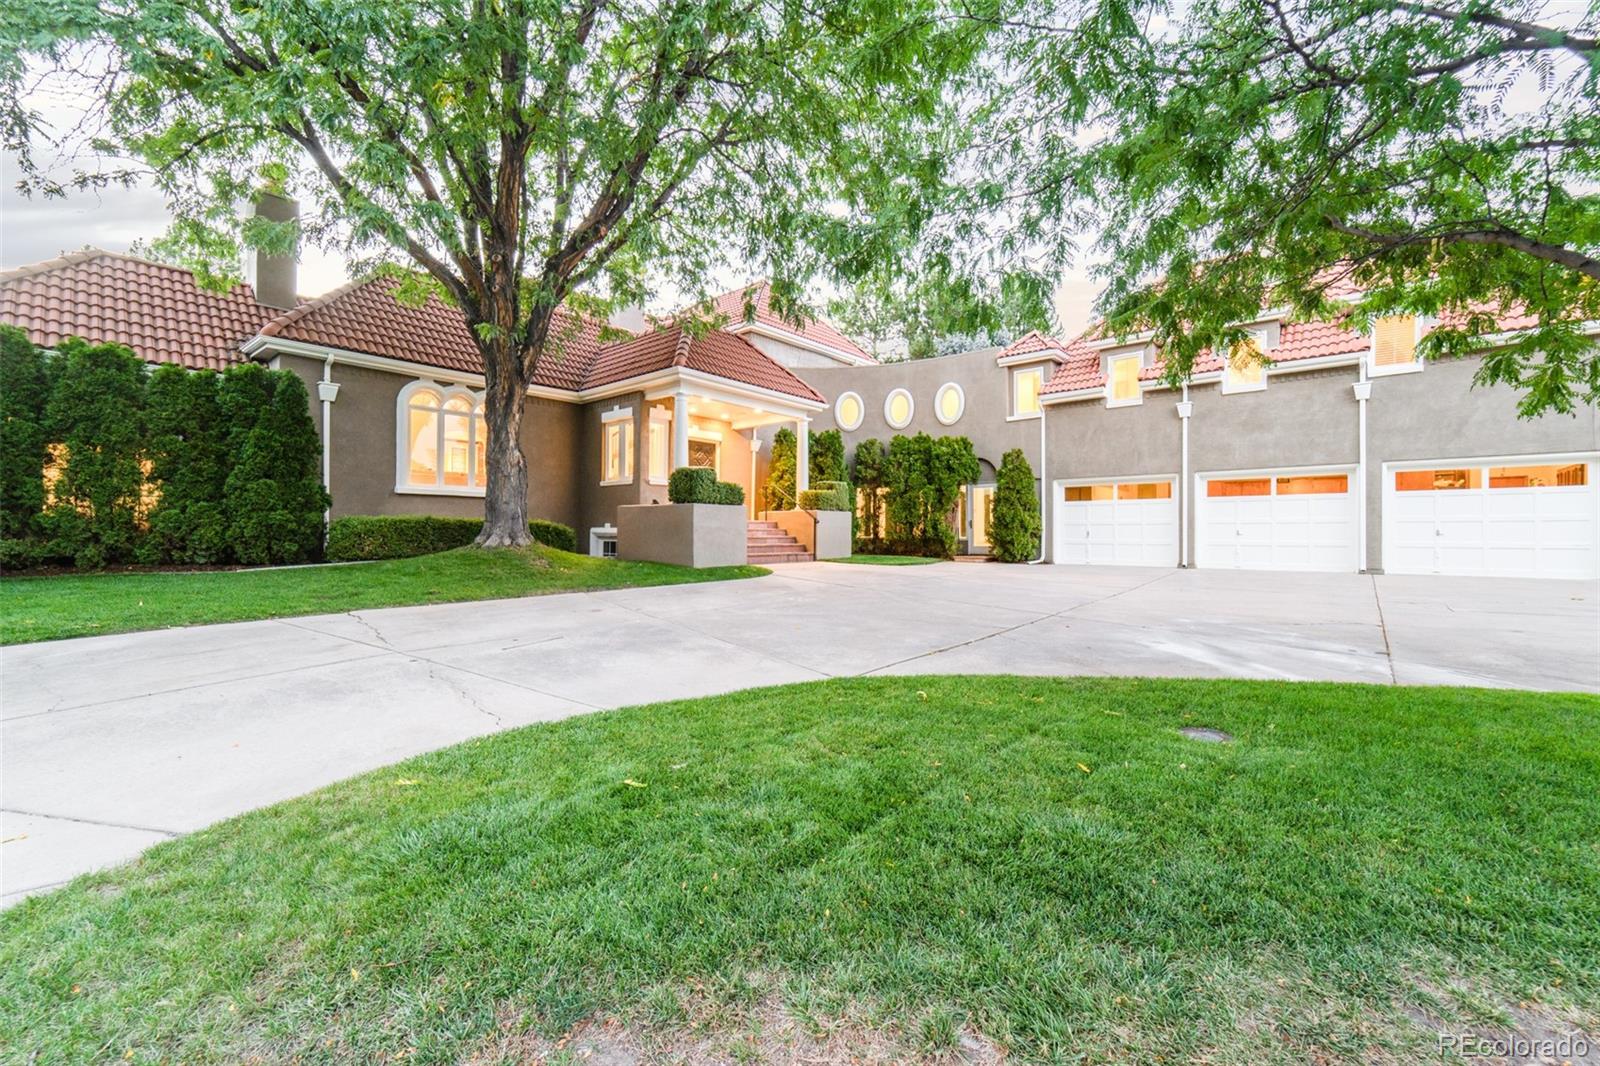 1  polo field lane, Denver sold home. Closed on 2024-04-25 for $4,490,000.